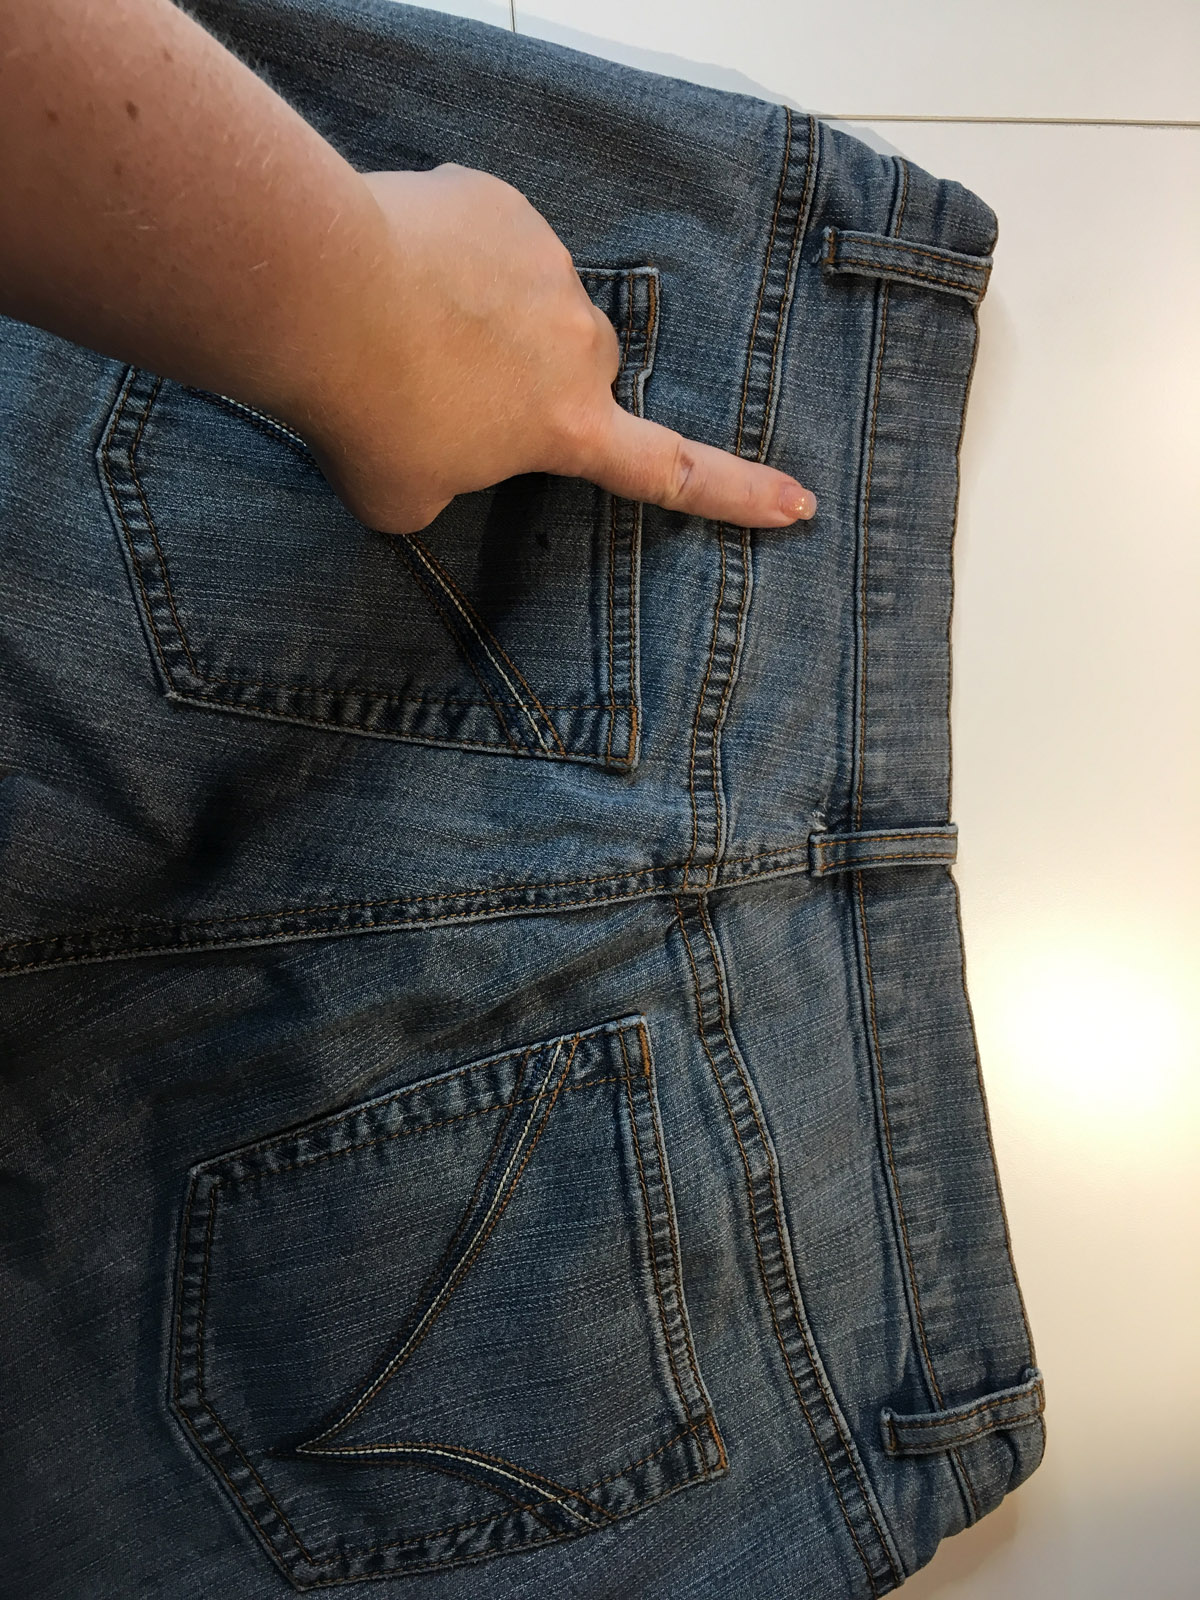 Tip for better fitting jeans